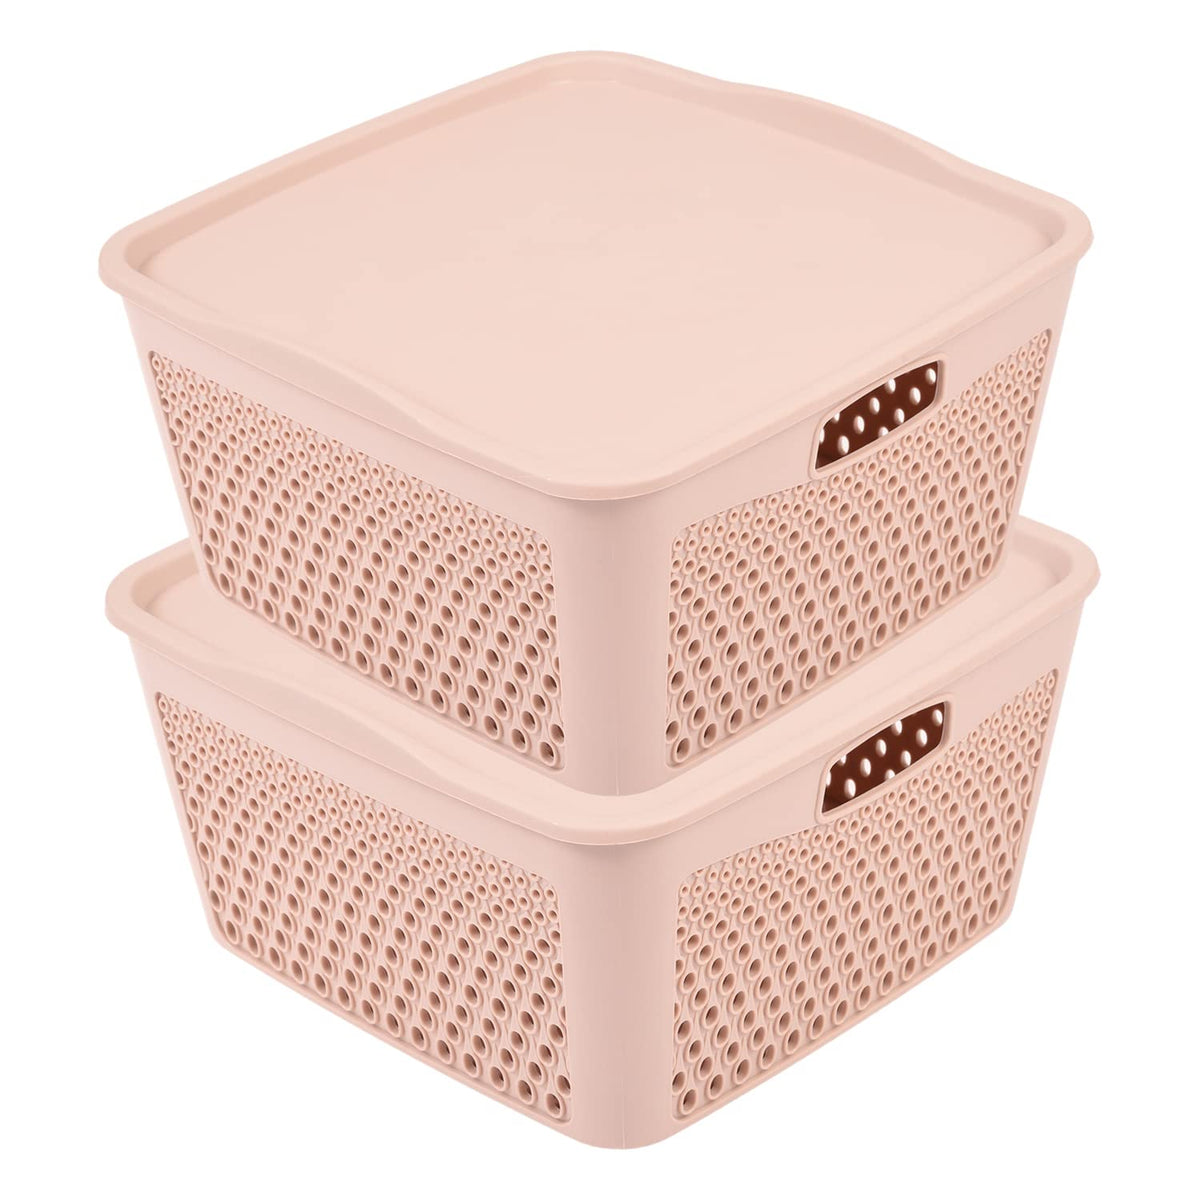 Kuber Industries Netted Design Unbreakable Multipurpose Square Shape Plastic Storage Baskets with lid Small Pack of 2 (Beige)